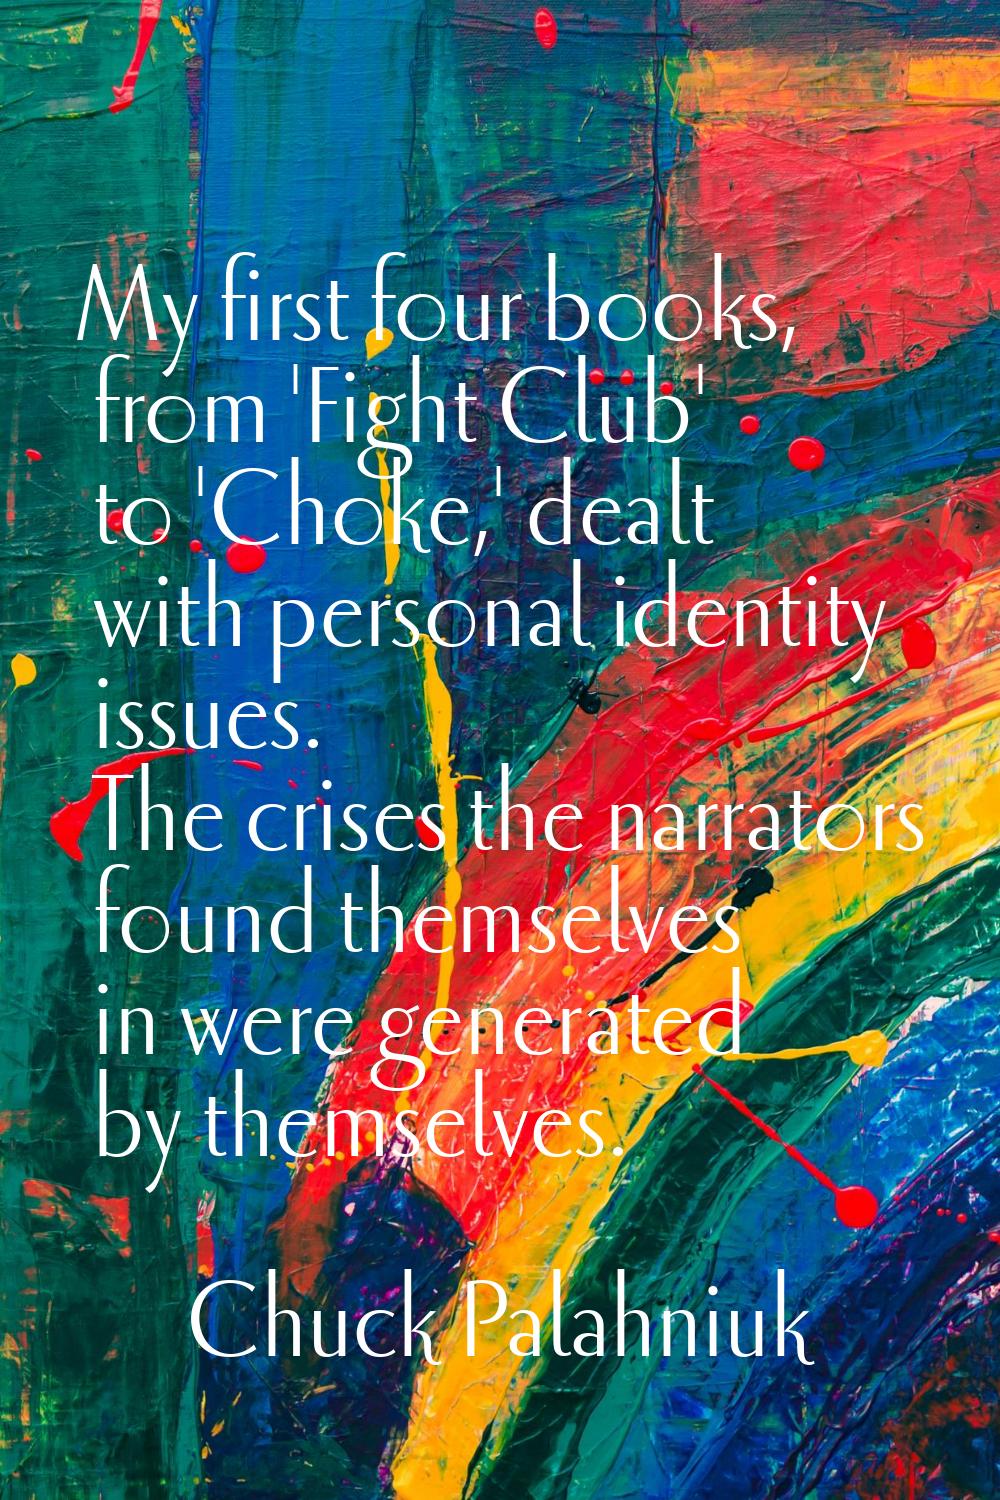 My first four books, from 'Fight Club' to 'Choke,' dealt with personal identity issues. The crises 